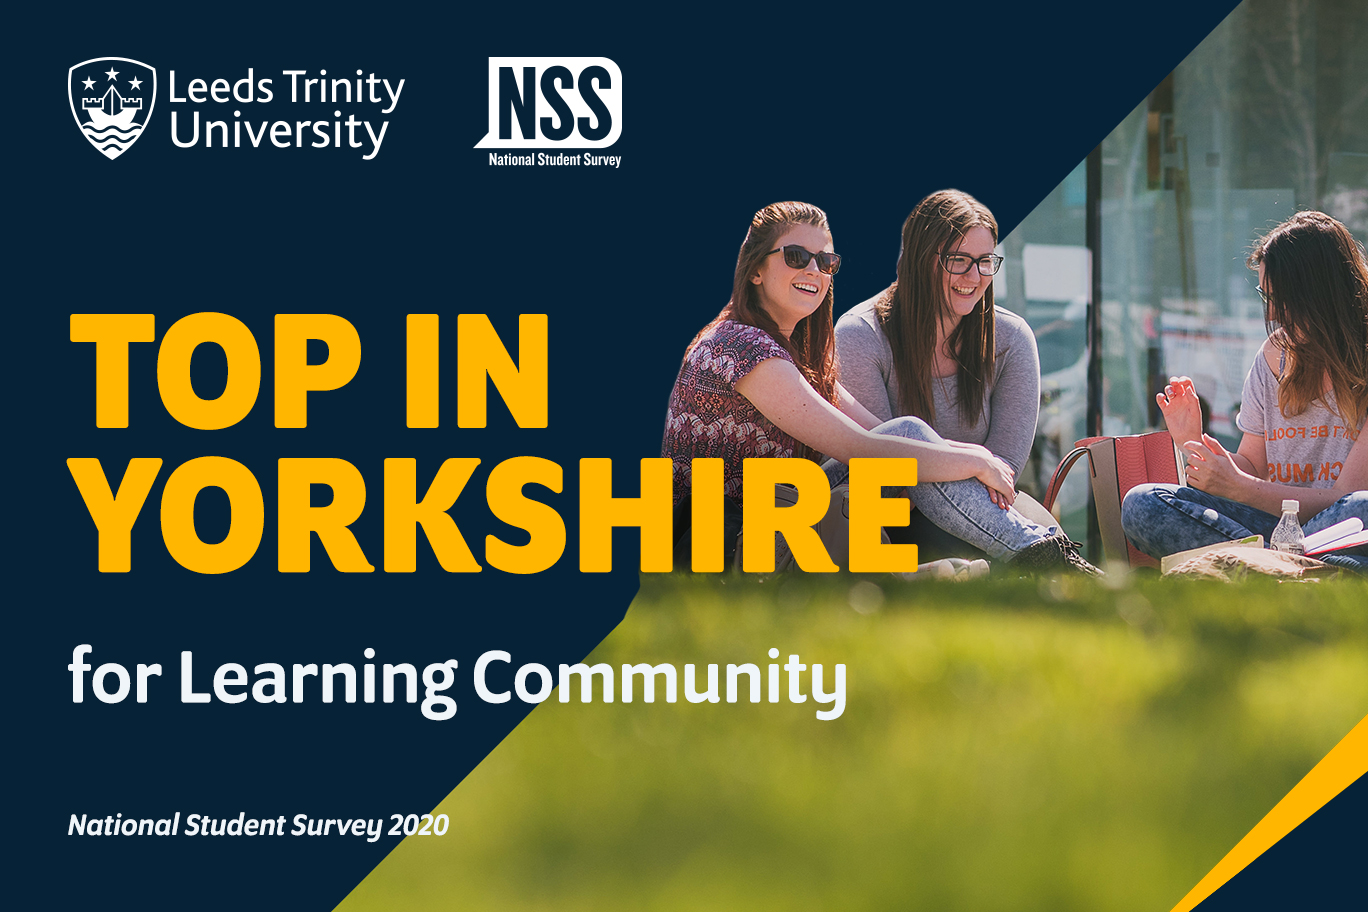 NSS 2020 Top in Yorkshire for Learning Community.